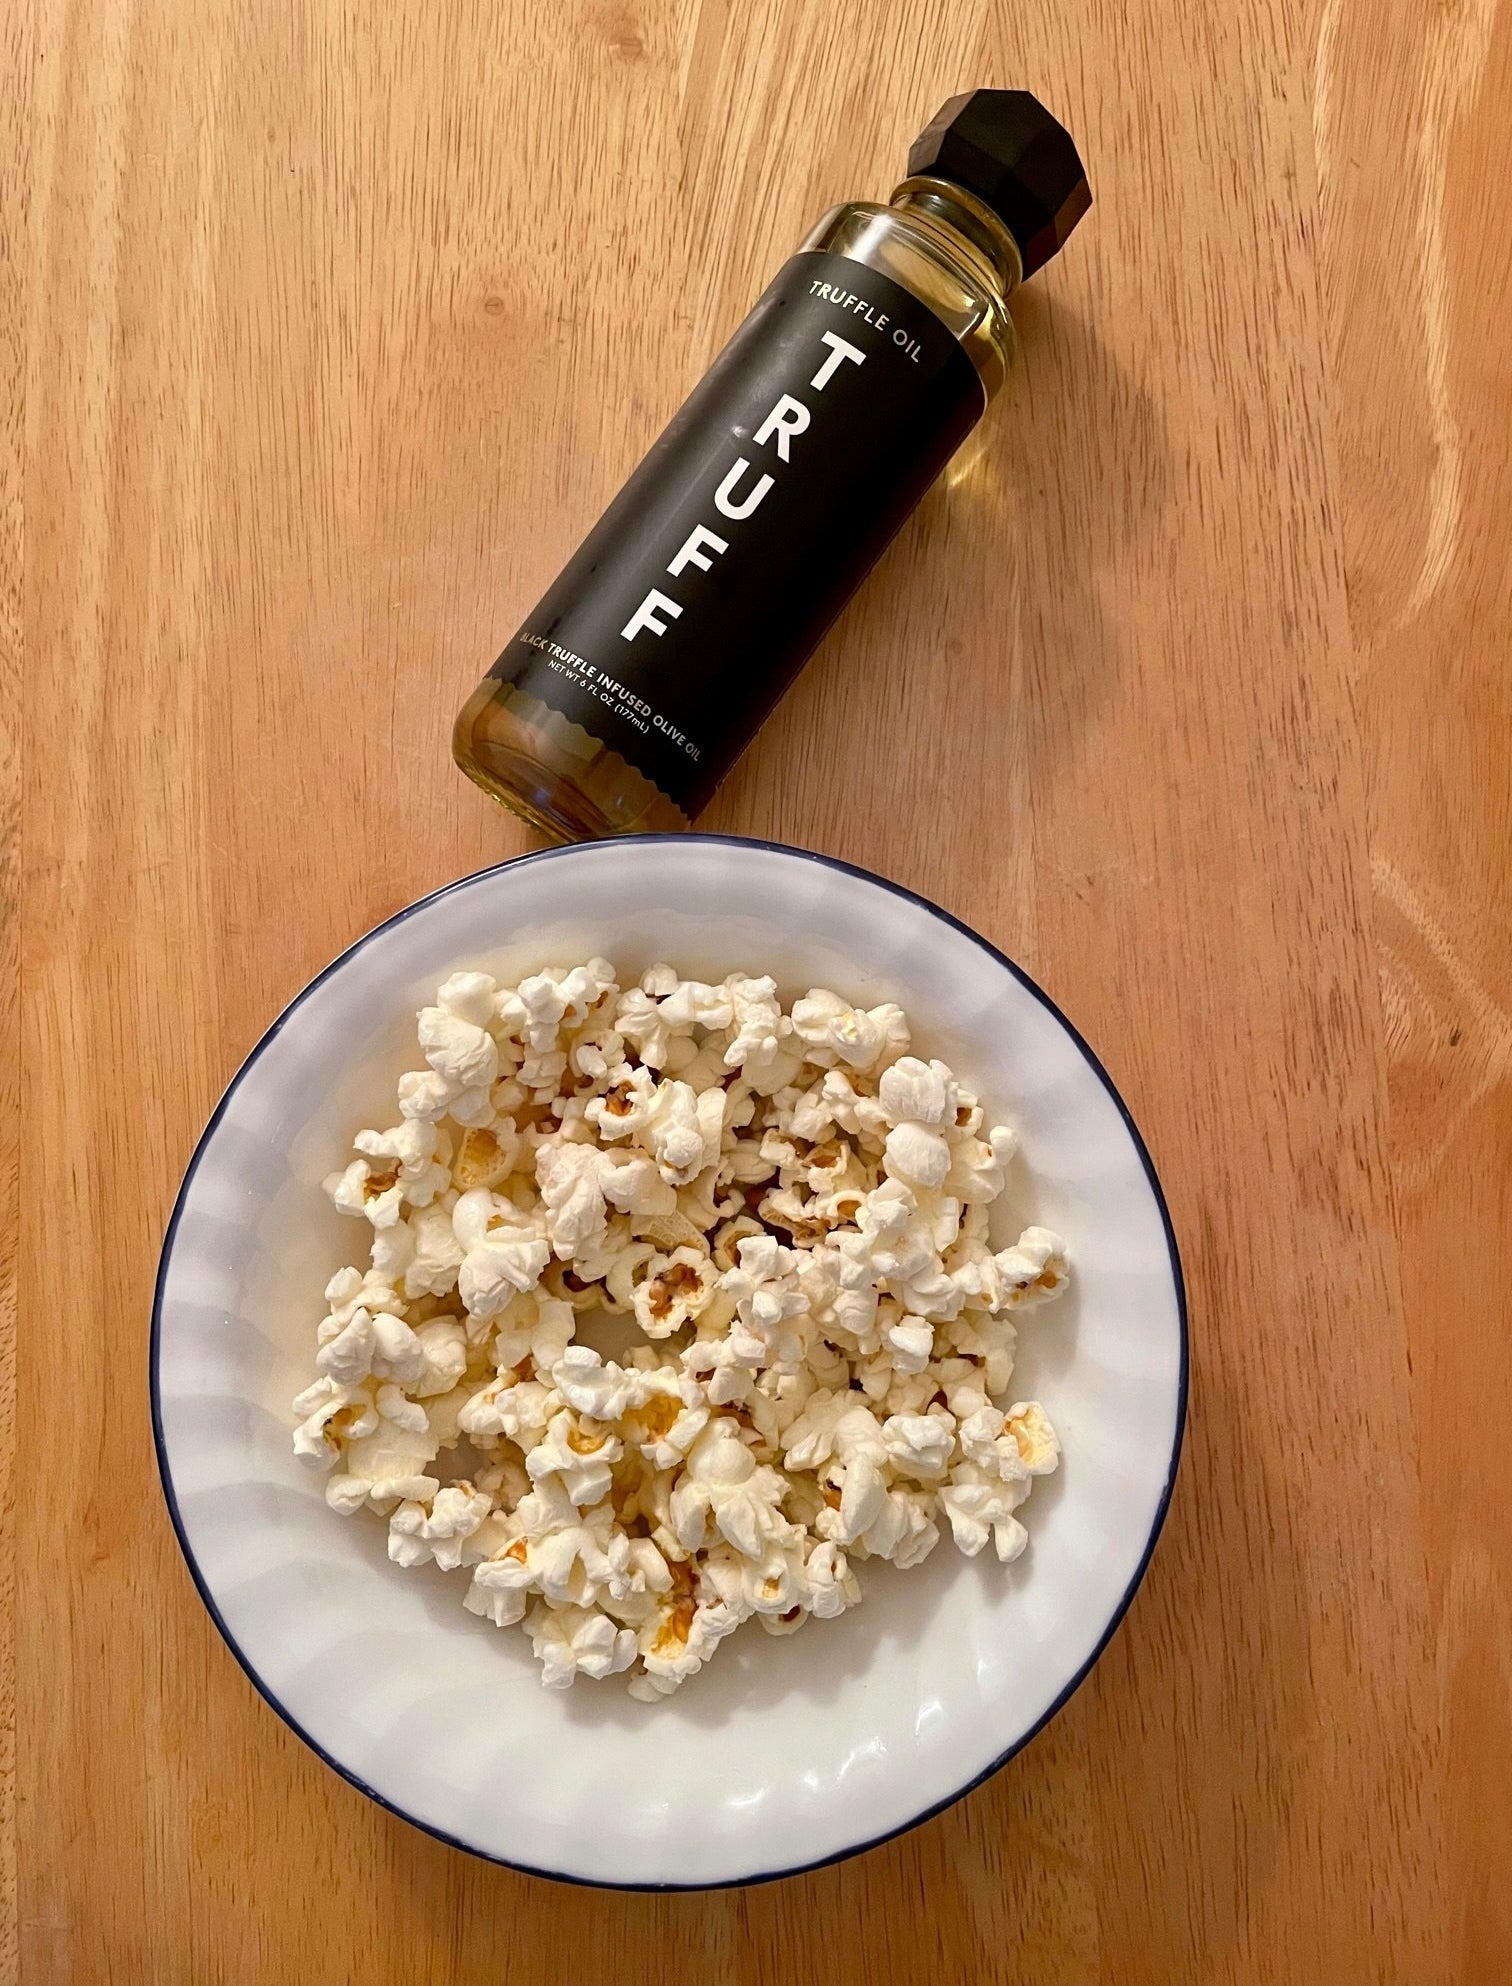 Popcorn with Black Truffle Infused Olive Oil